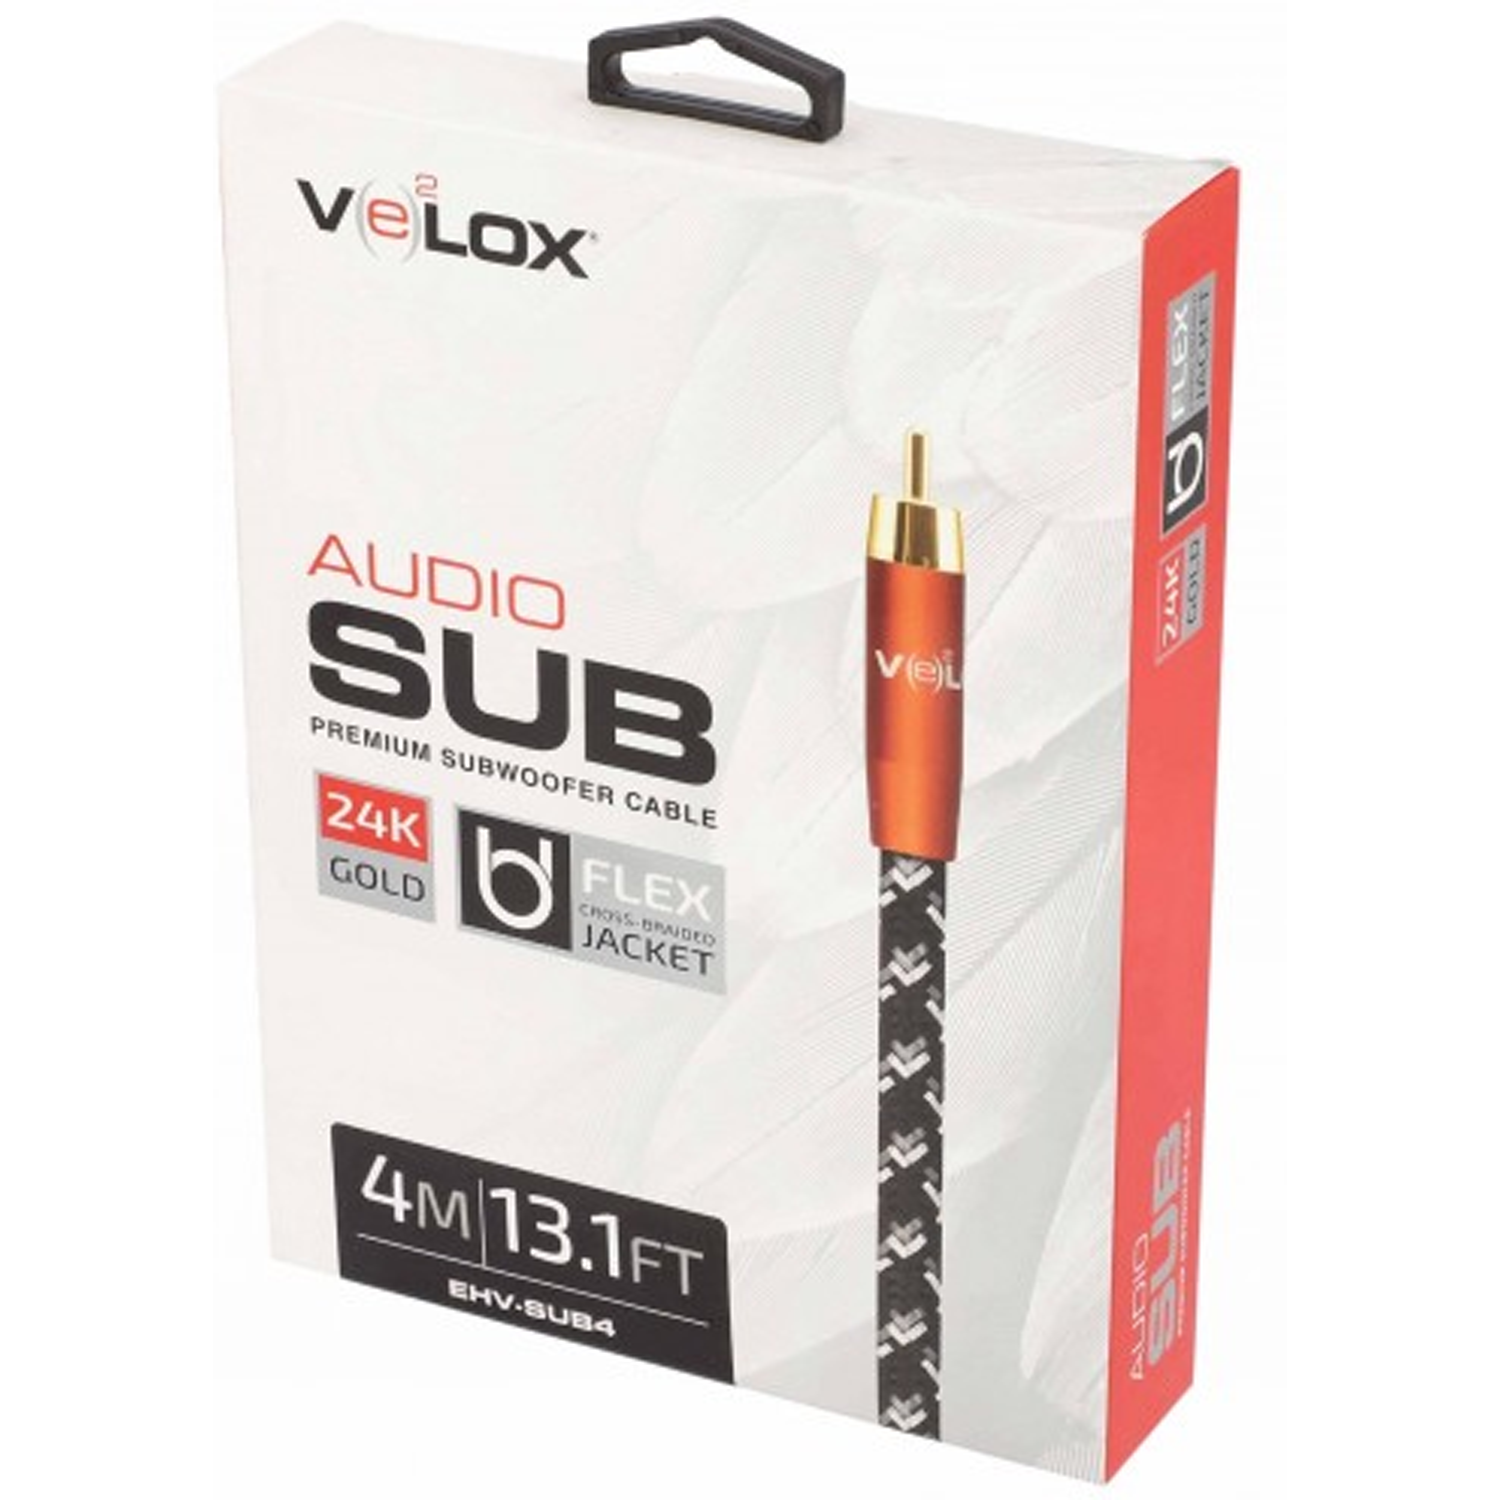 ETHEREAL EHV-SUB 12ft Velox Premium Subwoofer Cable